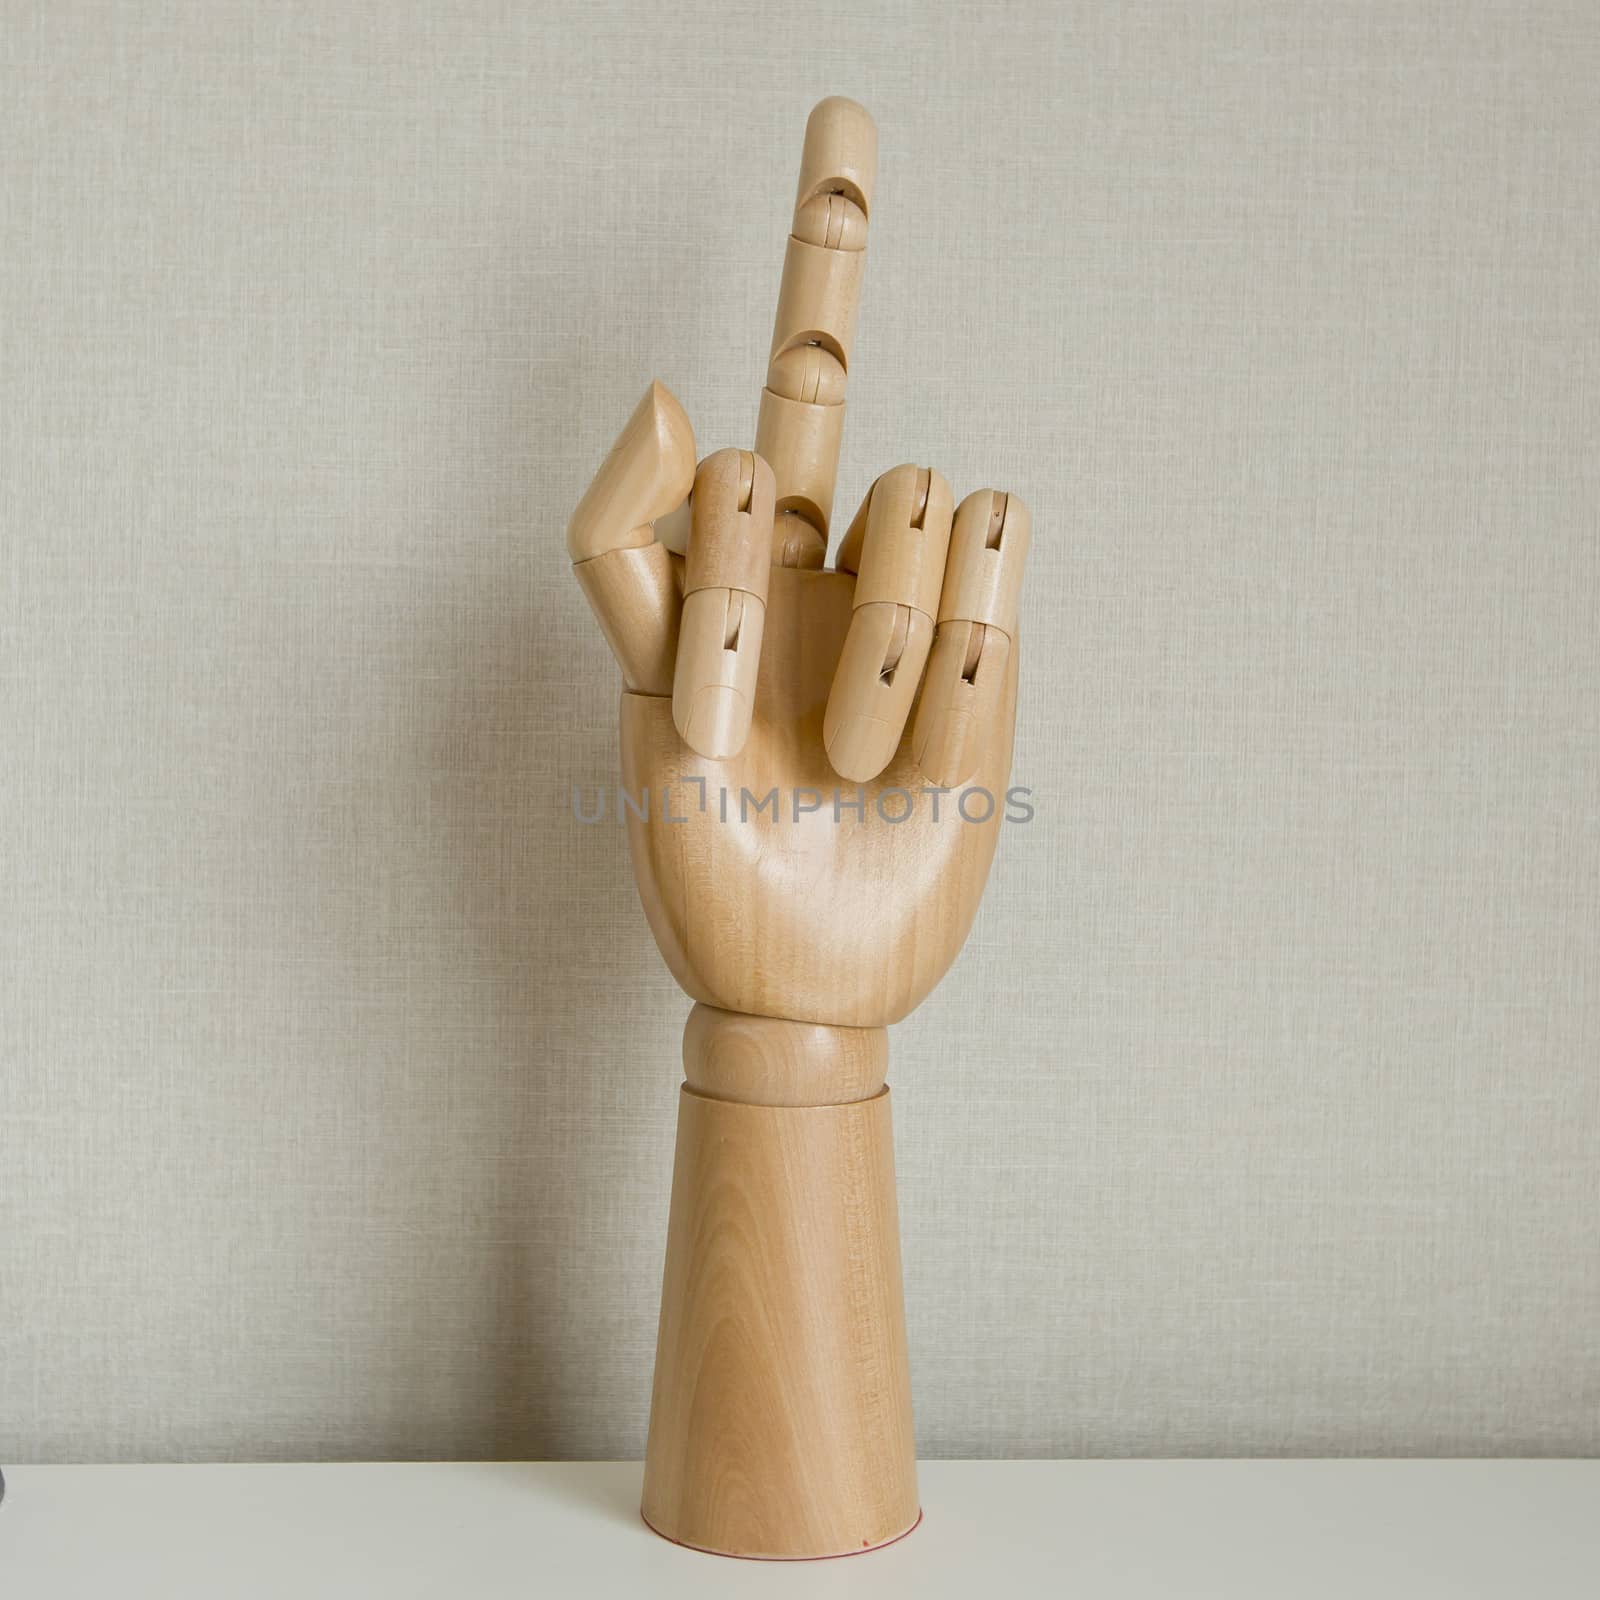 Hand Gesturing With Middle Finger On White Background